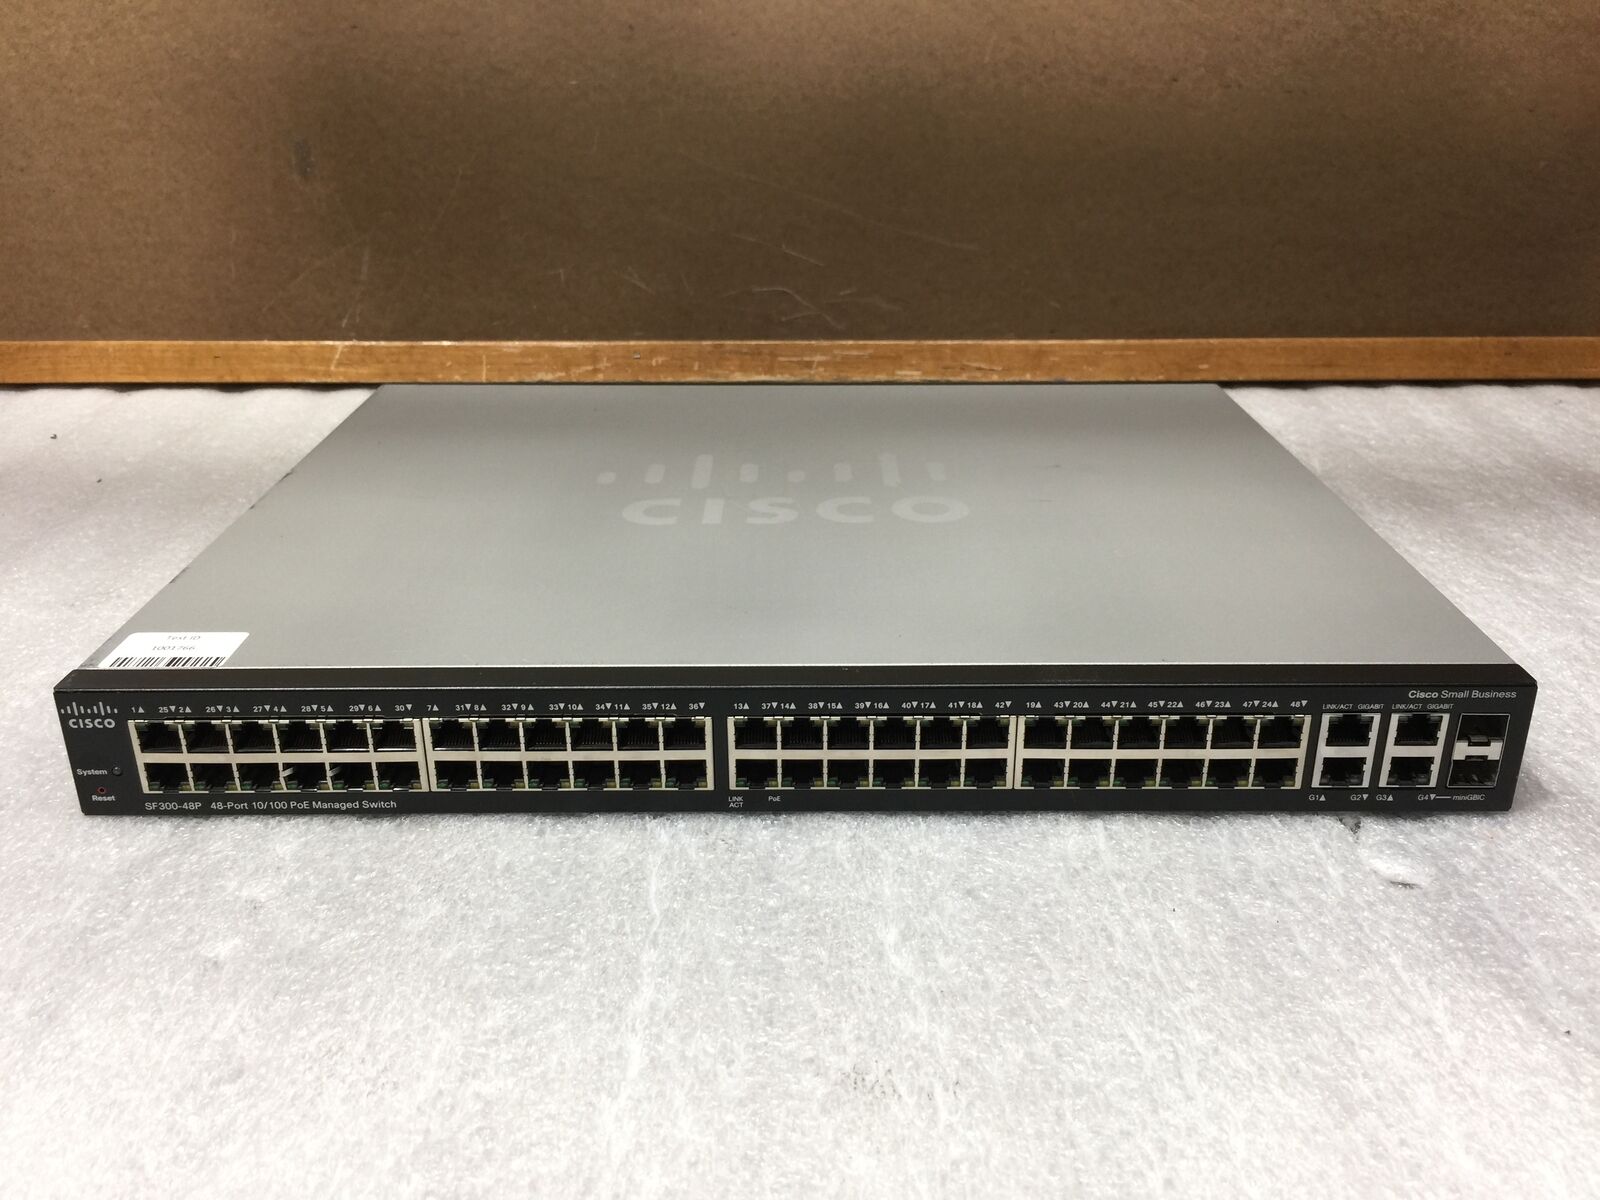 Cisco SF300-48P 48-port 10/100 PoE Managed Switch, Tested/Working/Factory Reset